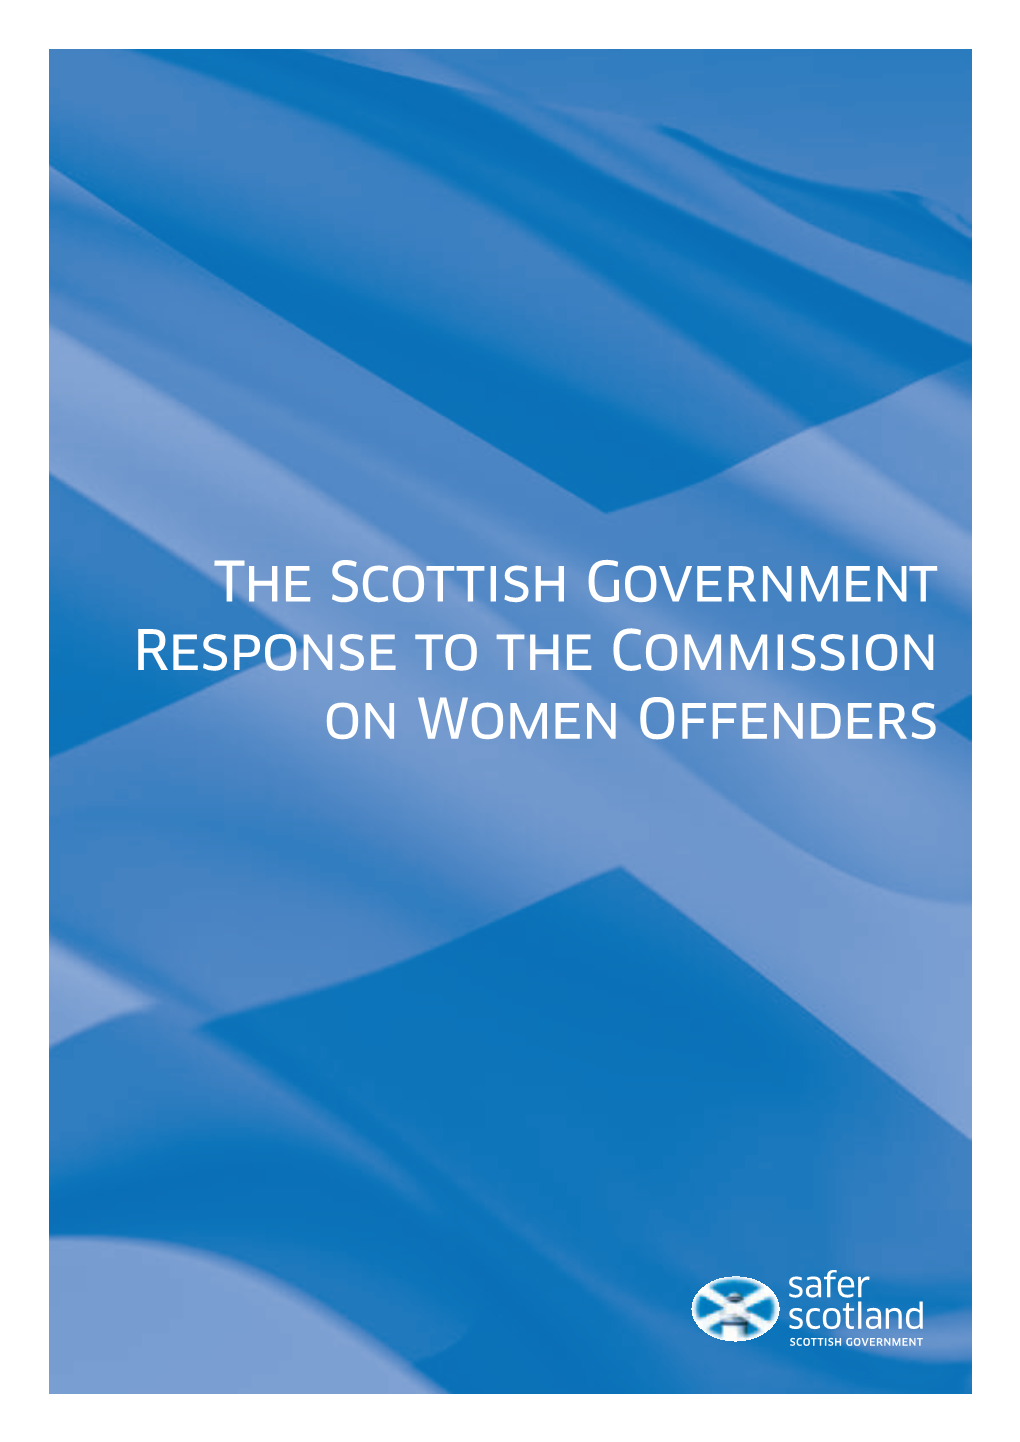 The Scottish Government Response to the Commission on Women Offenders FOREWORD